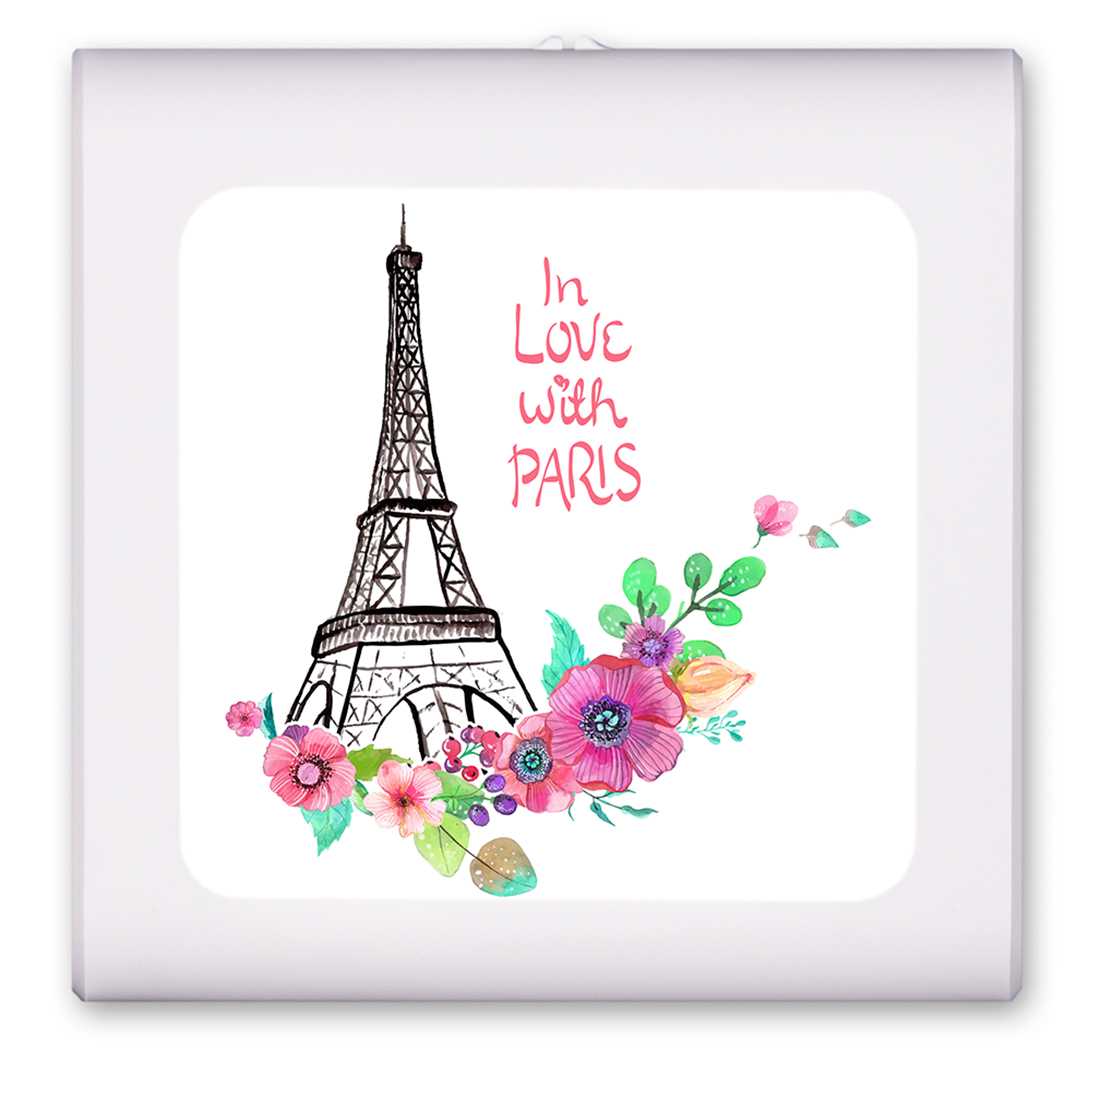 In Love with Paris - #3080